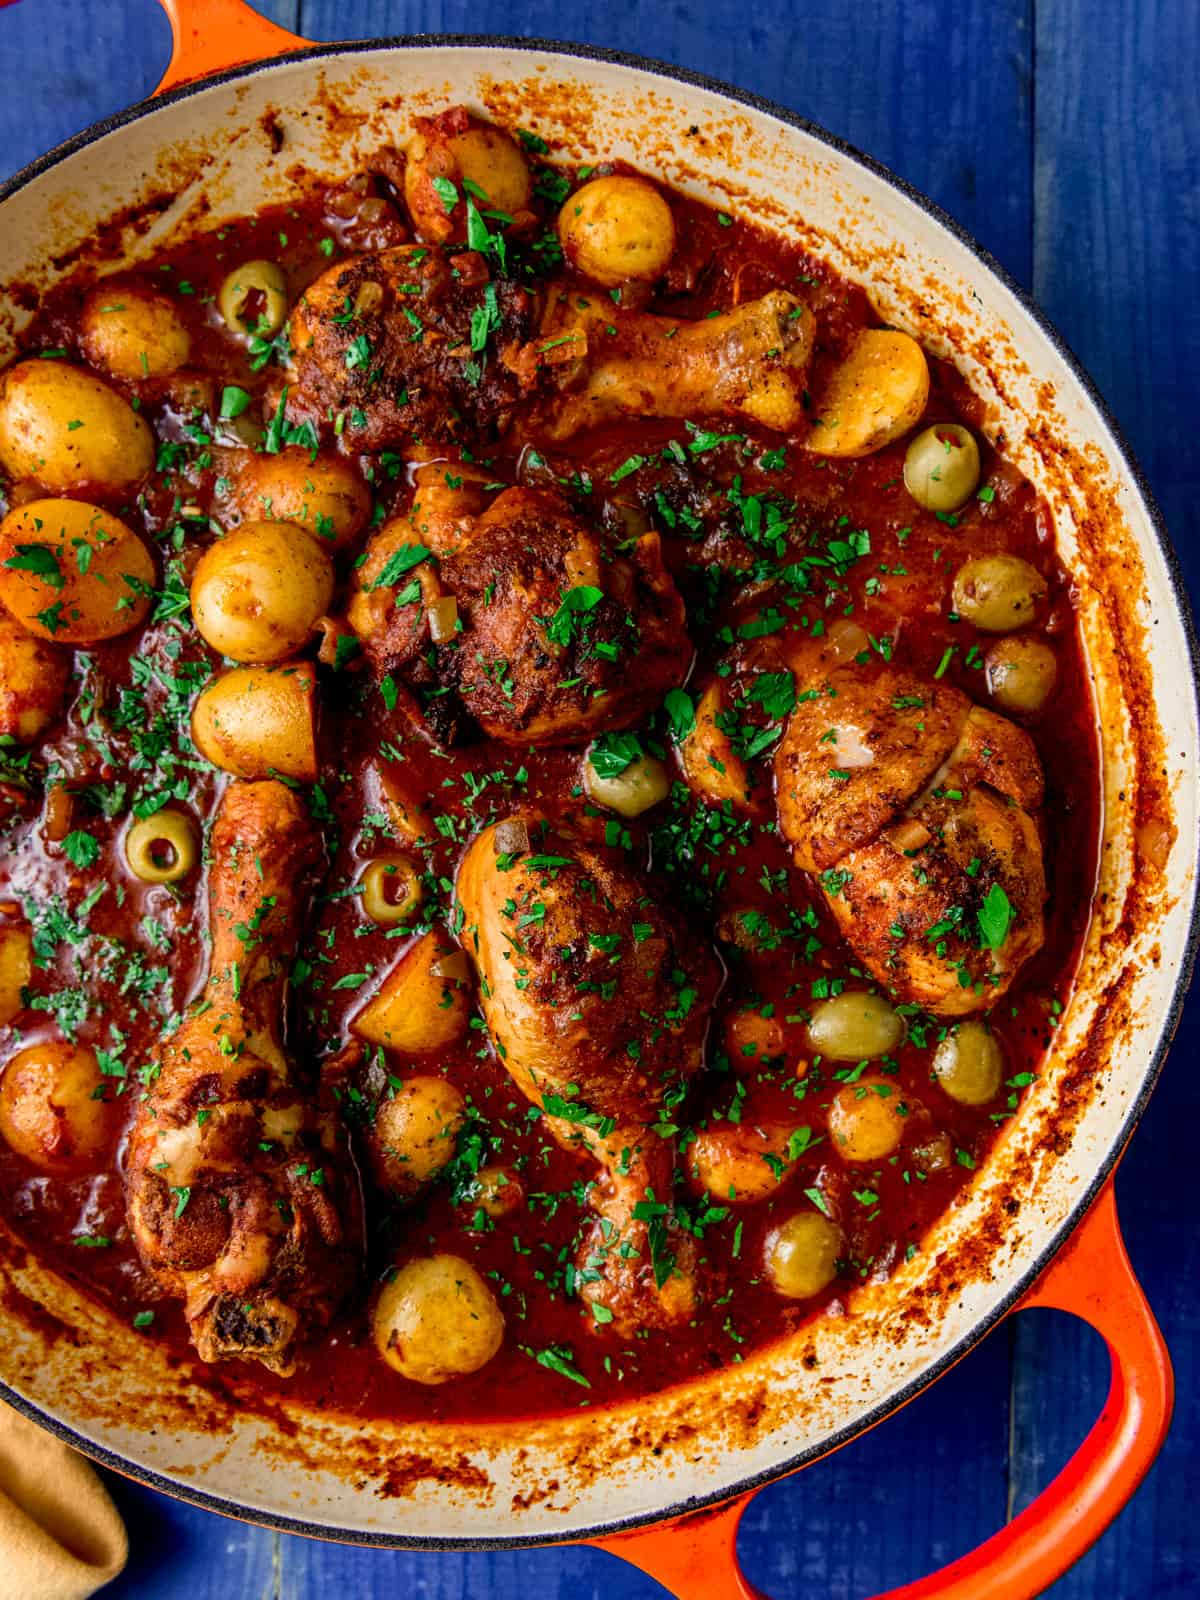 Chicken stew with potatoes and olives in a rich and smoky tomato based stew.